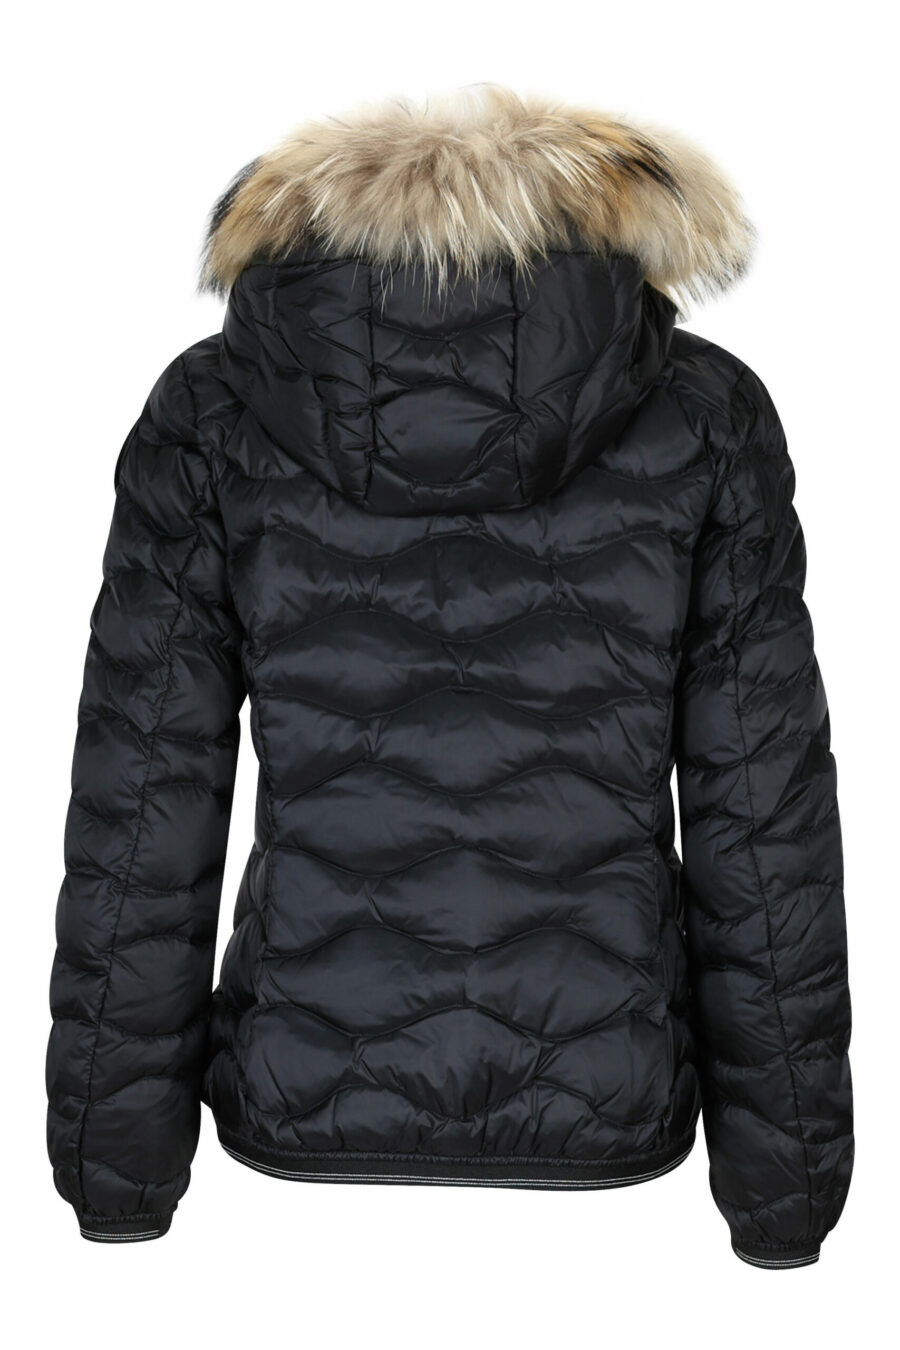 Black hooded fur hoodie with wavy lines and logo patch - 8058610692520 2 scaled